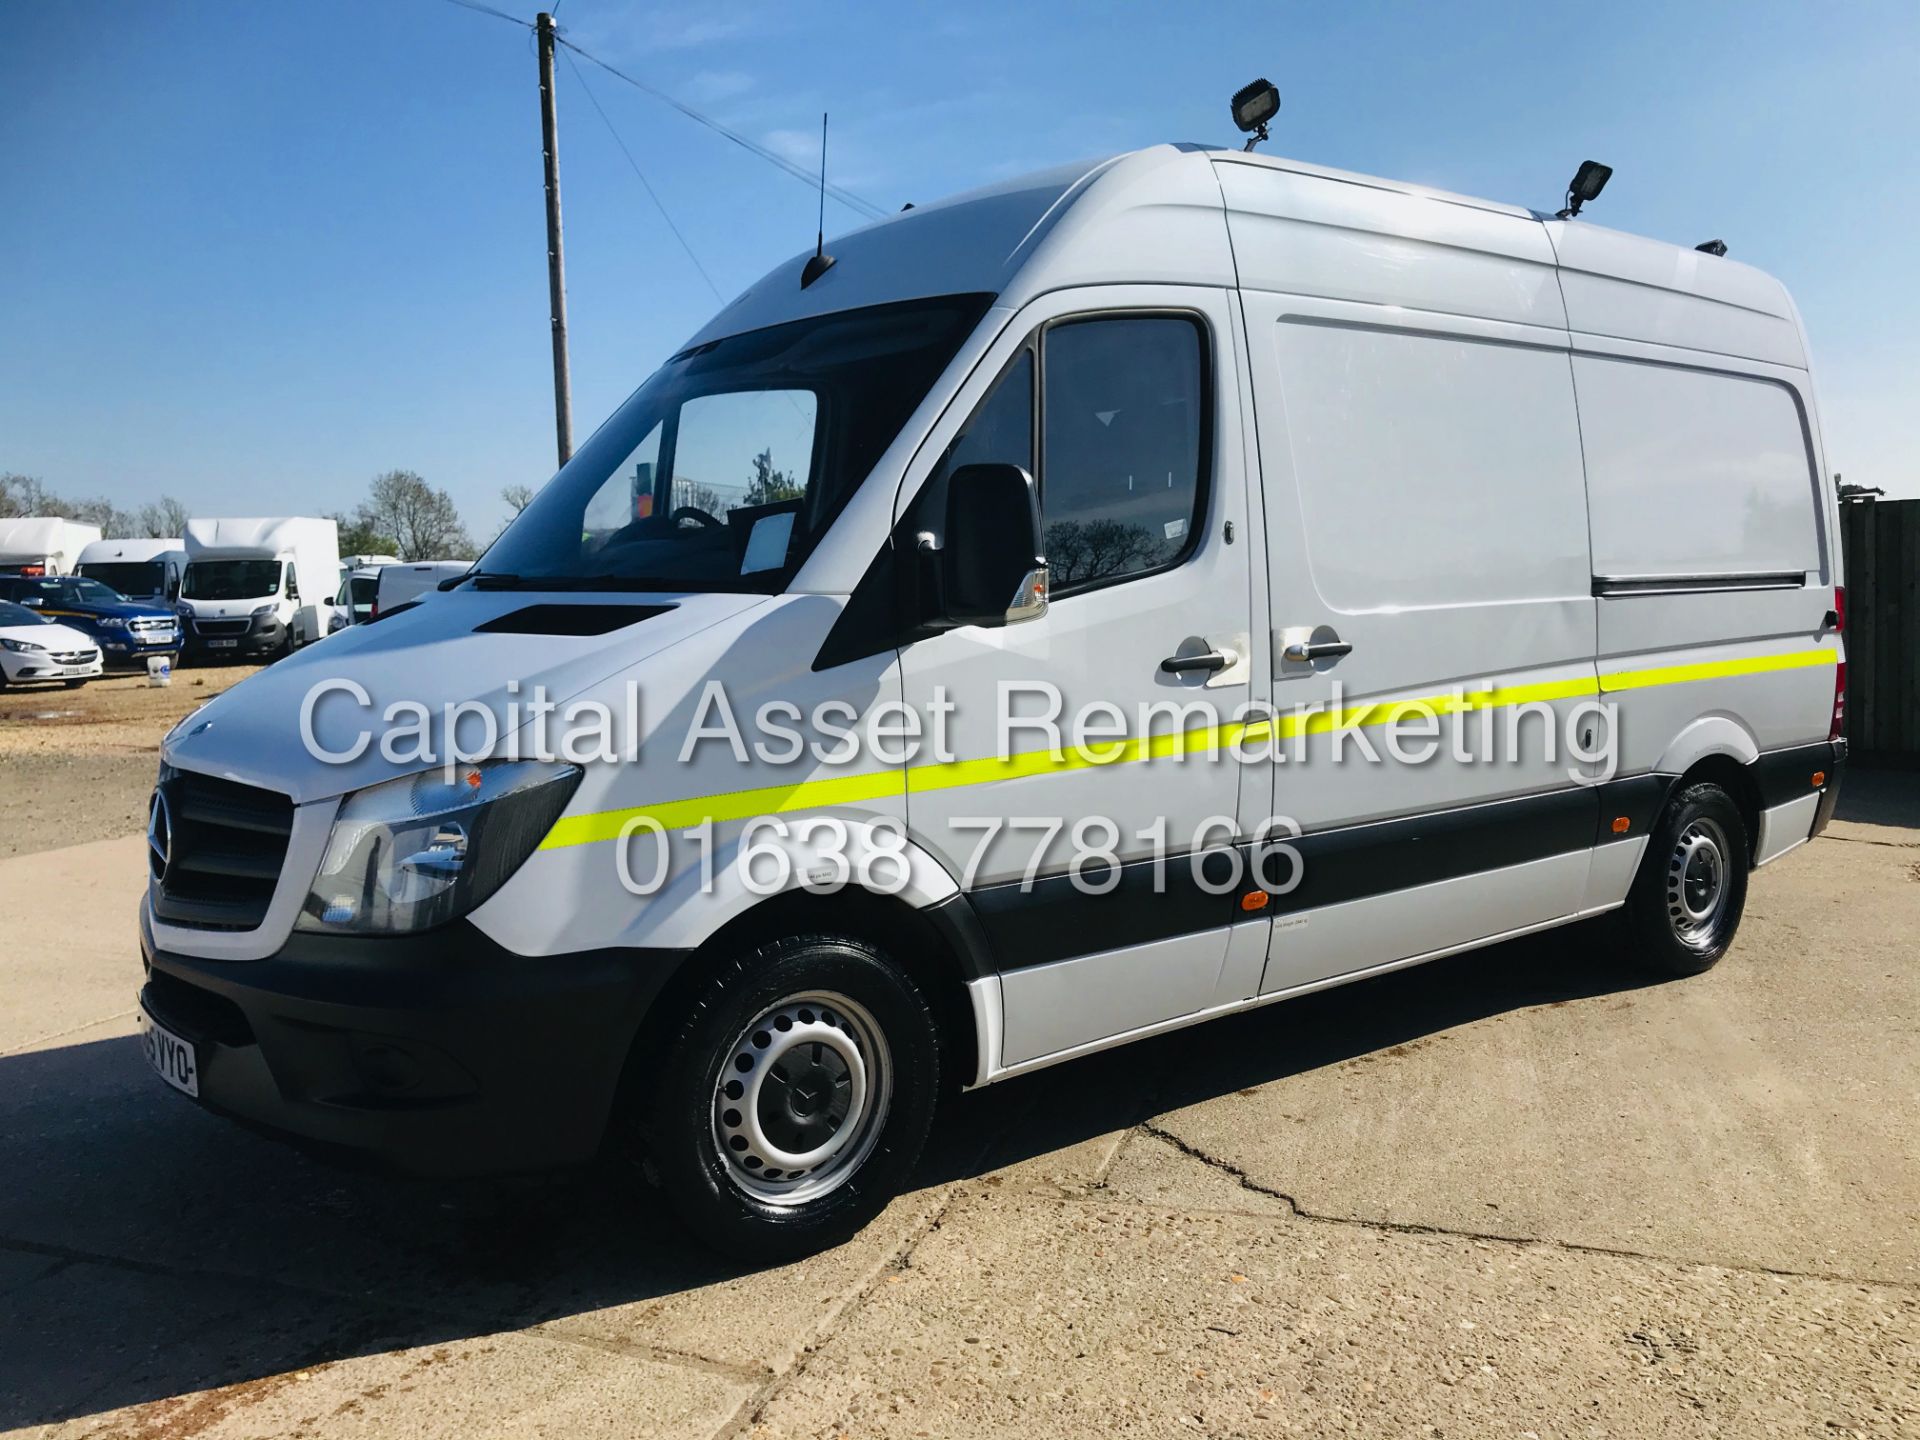 (ON SALE) MERCEDES SPRINTER 313CDI "FULLY FITTED CCTV DRAINAGE VAN" 1 OWNER FSH (15 REG) - Image 7 of 38